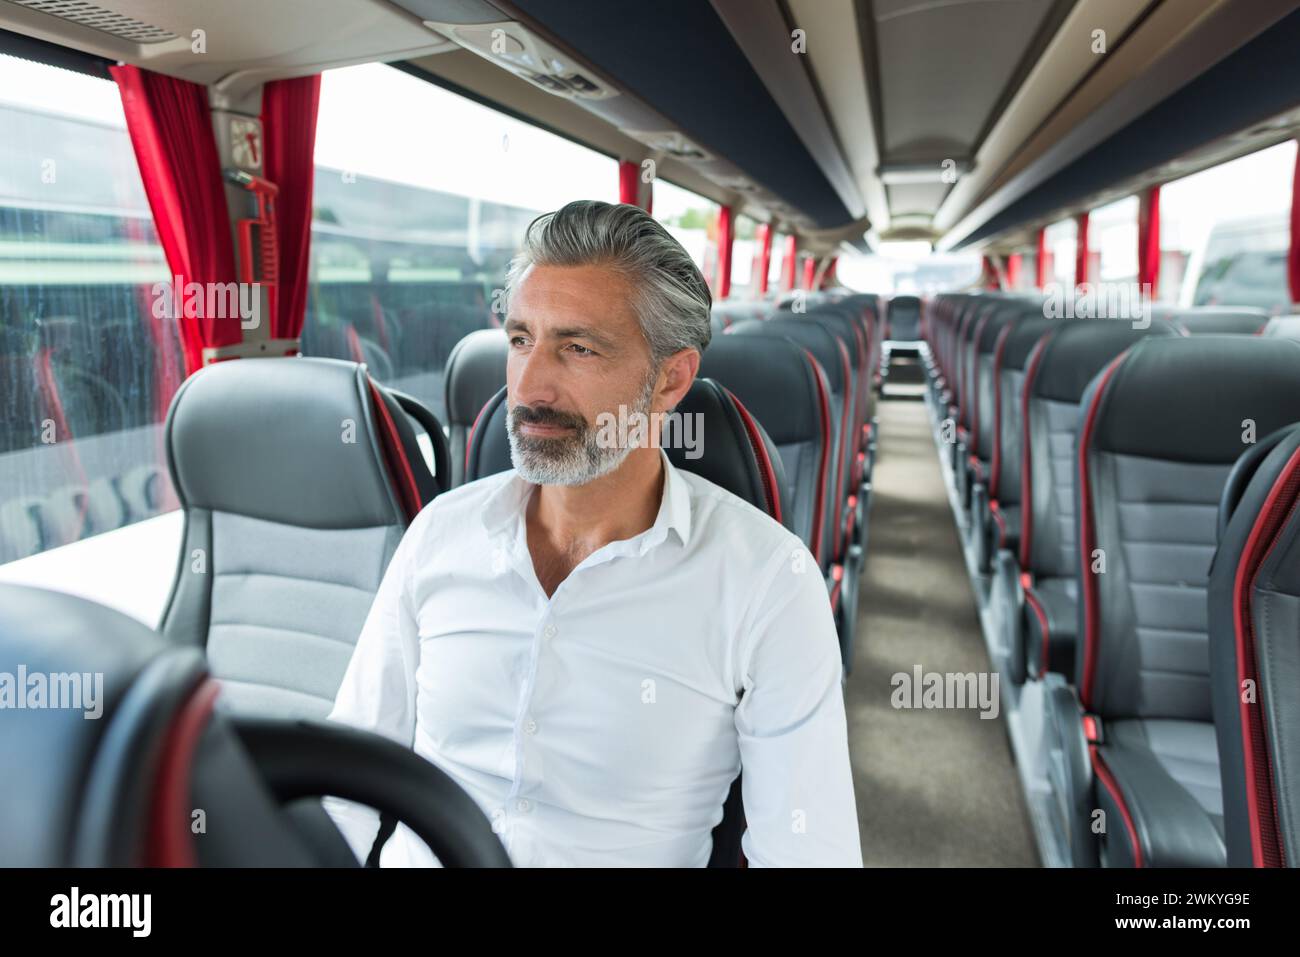 a portrait of a passenger in the coach Stock Photo